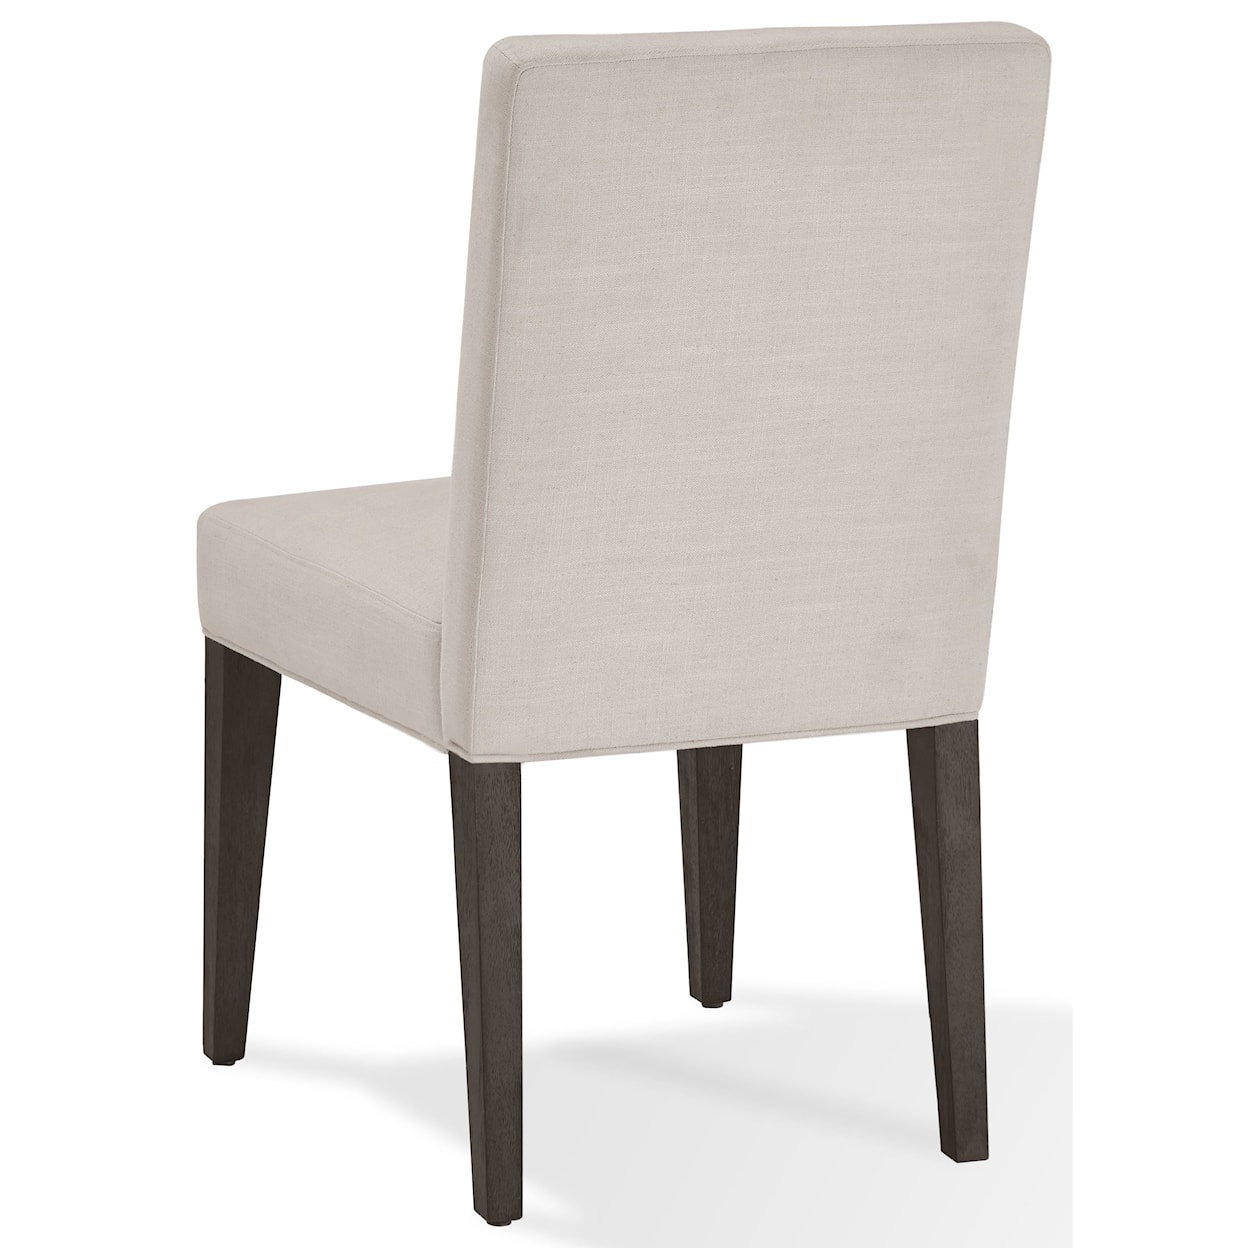 Modus International Modesto Upholstered Side Chair in French Roast